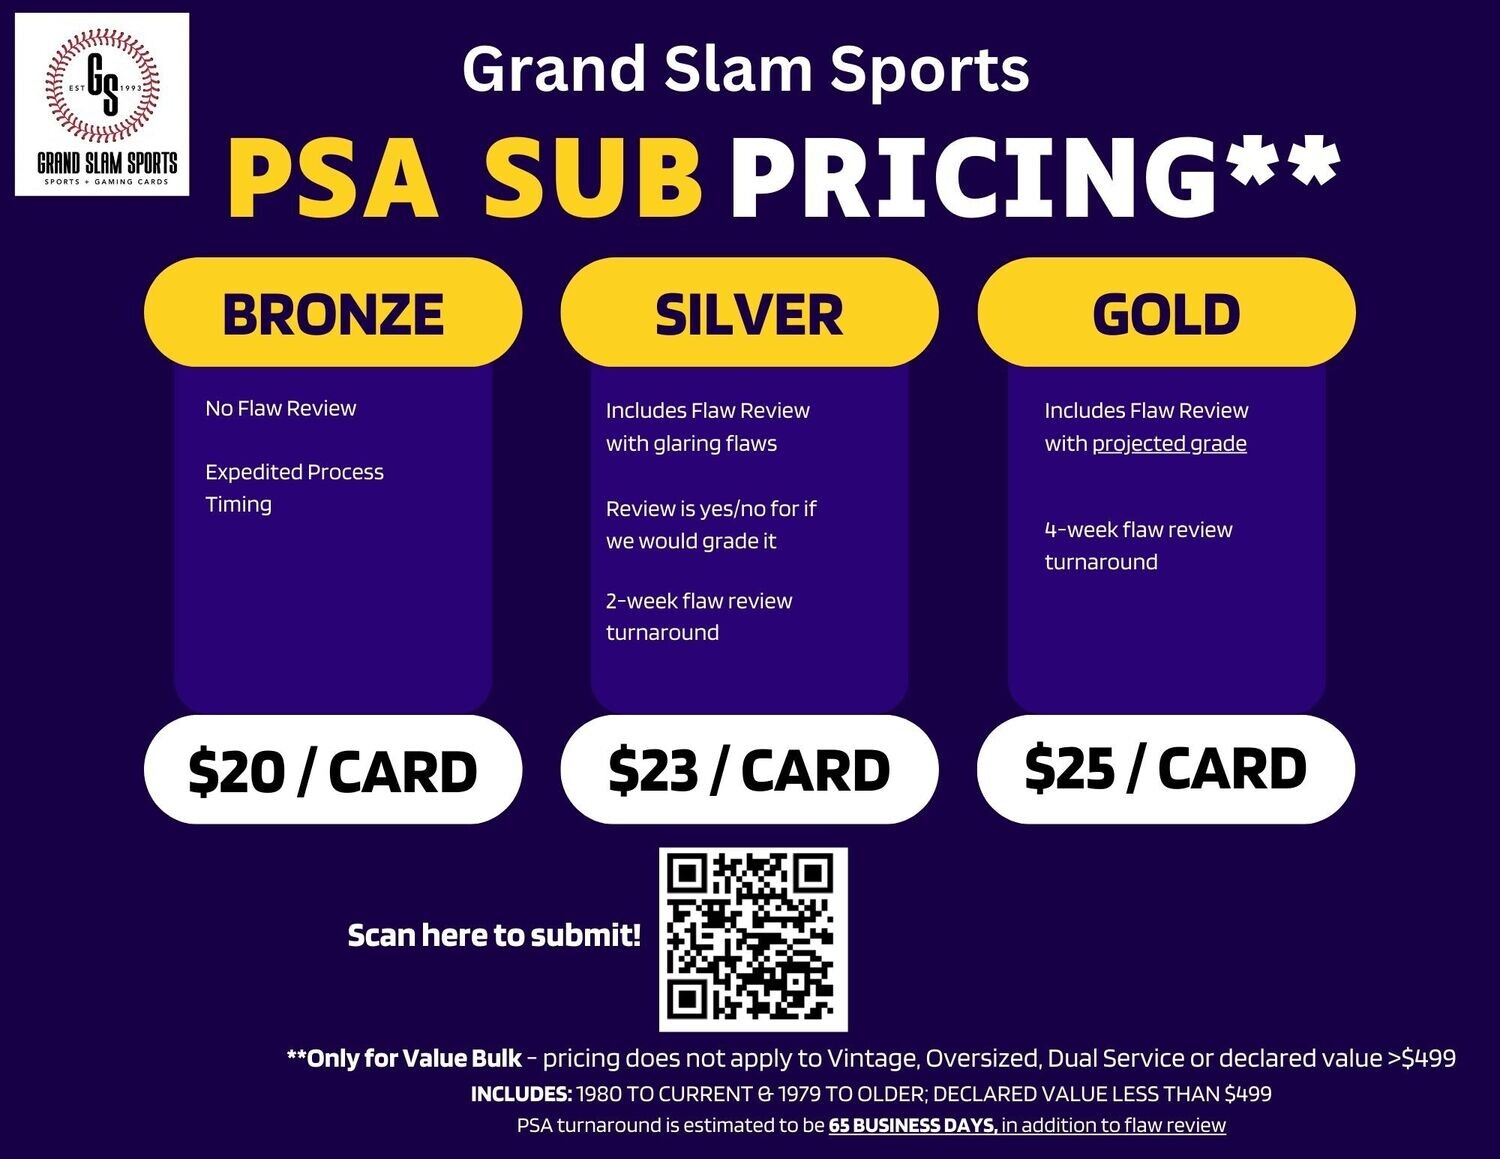 PSA Submission with Grand Slam!